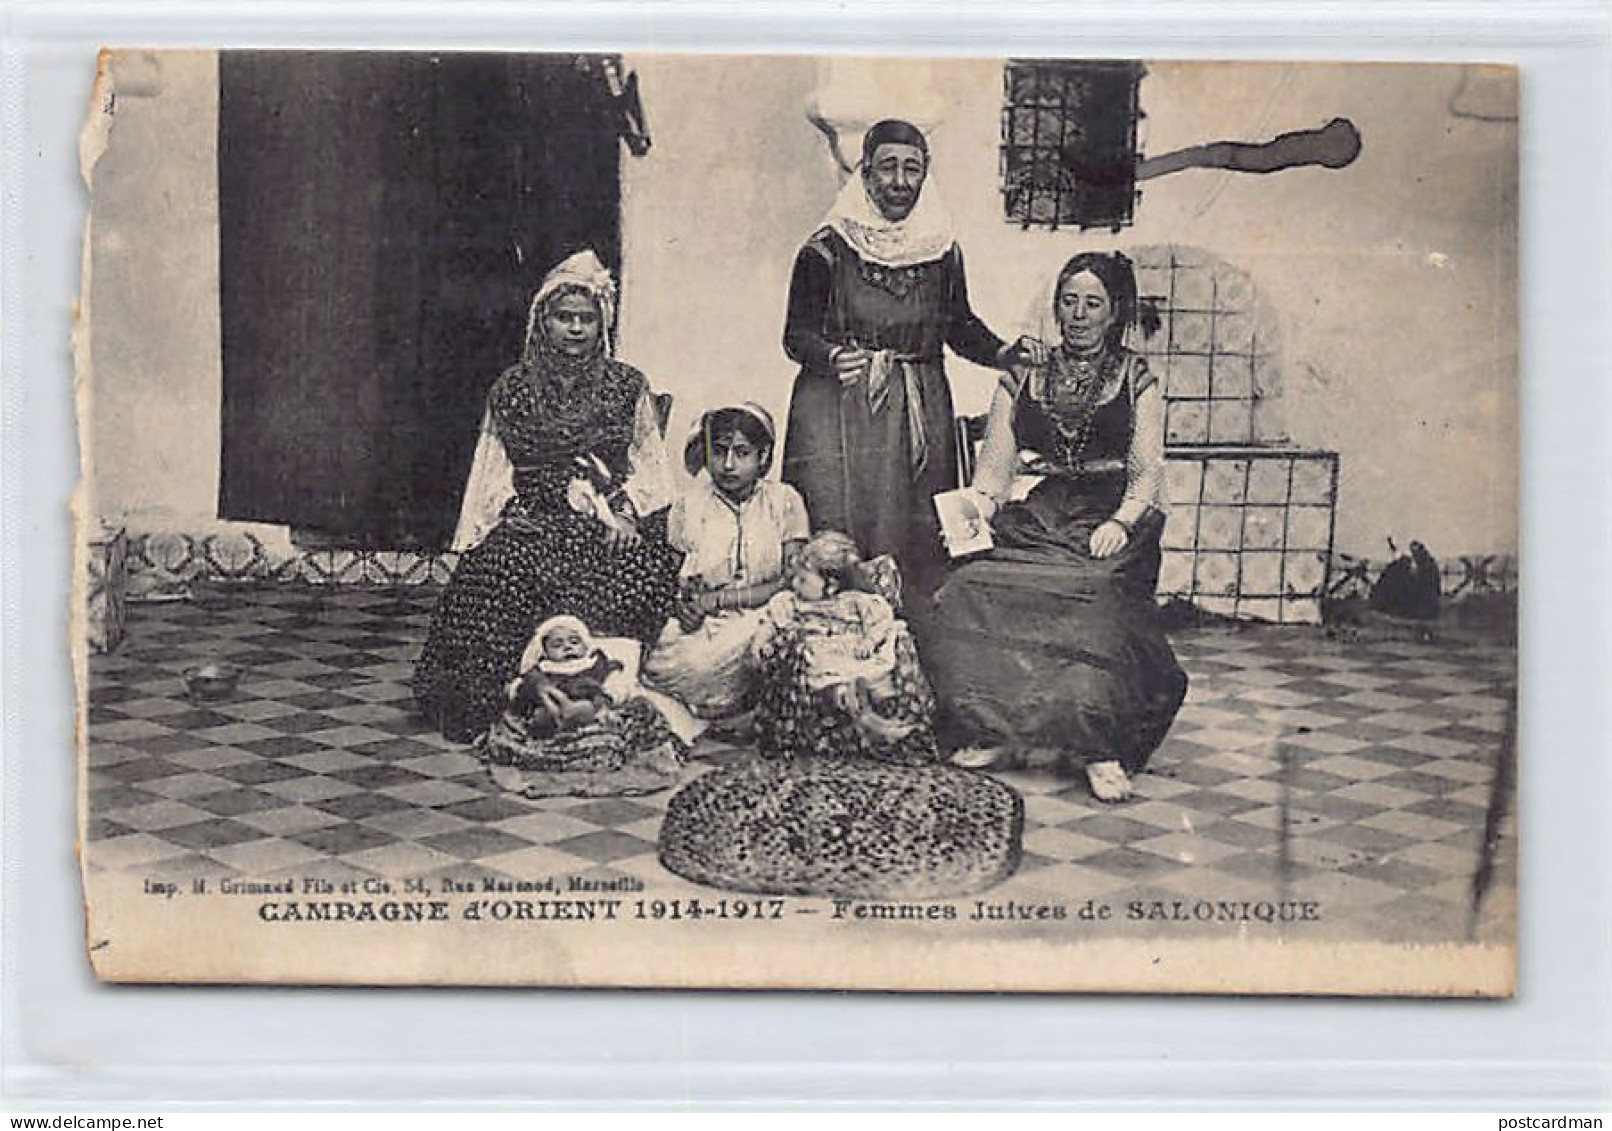 JUDAICA - Greece - SALONICA - Jewish Family - SEE SCANS FOR CONDITION - Publ. H. Grimaud  - Jewish